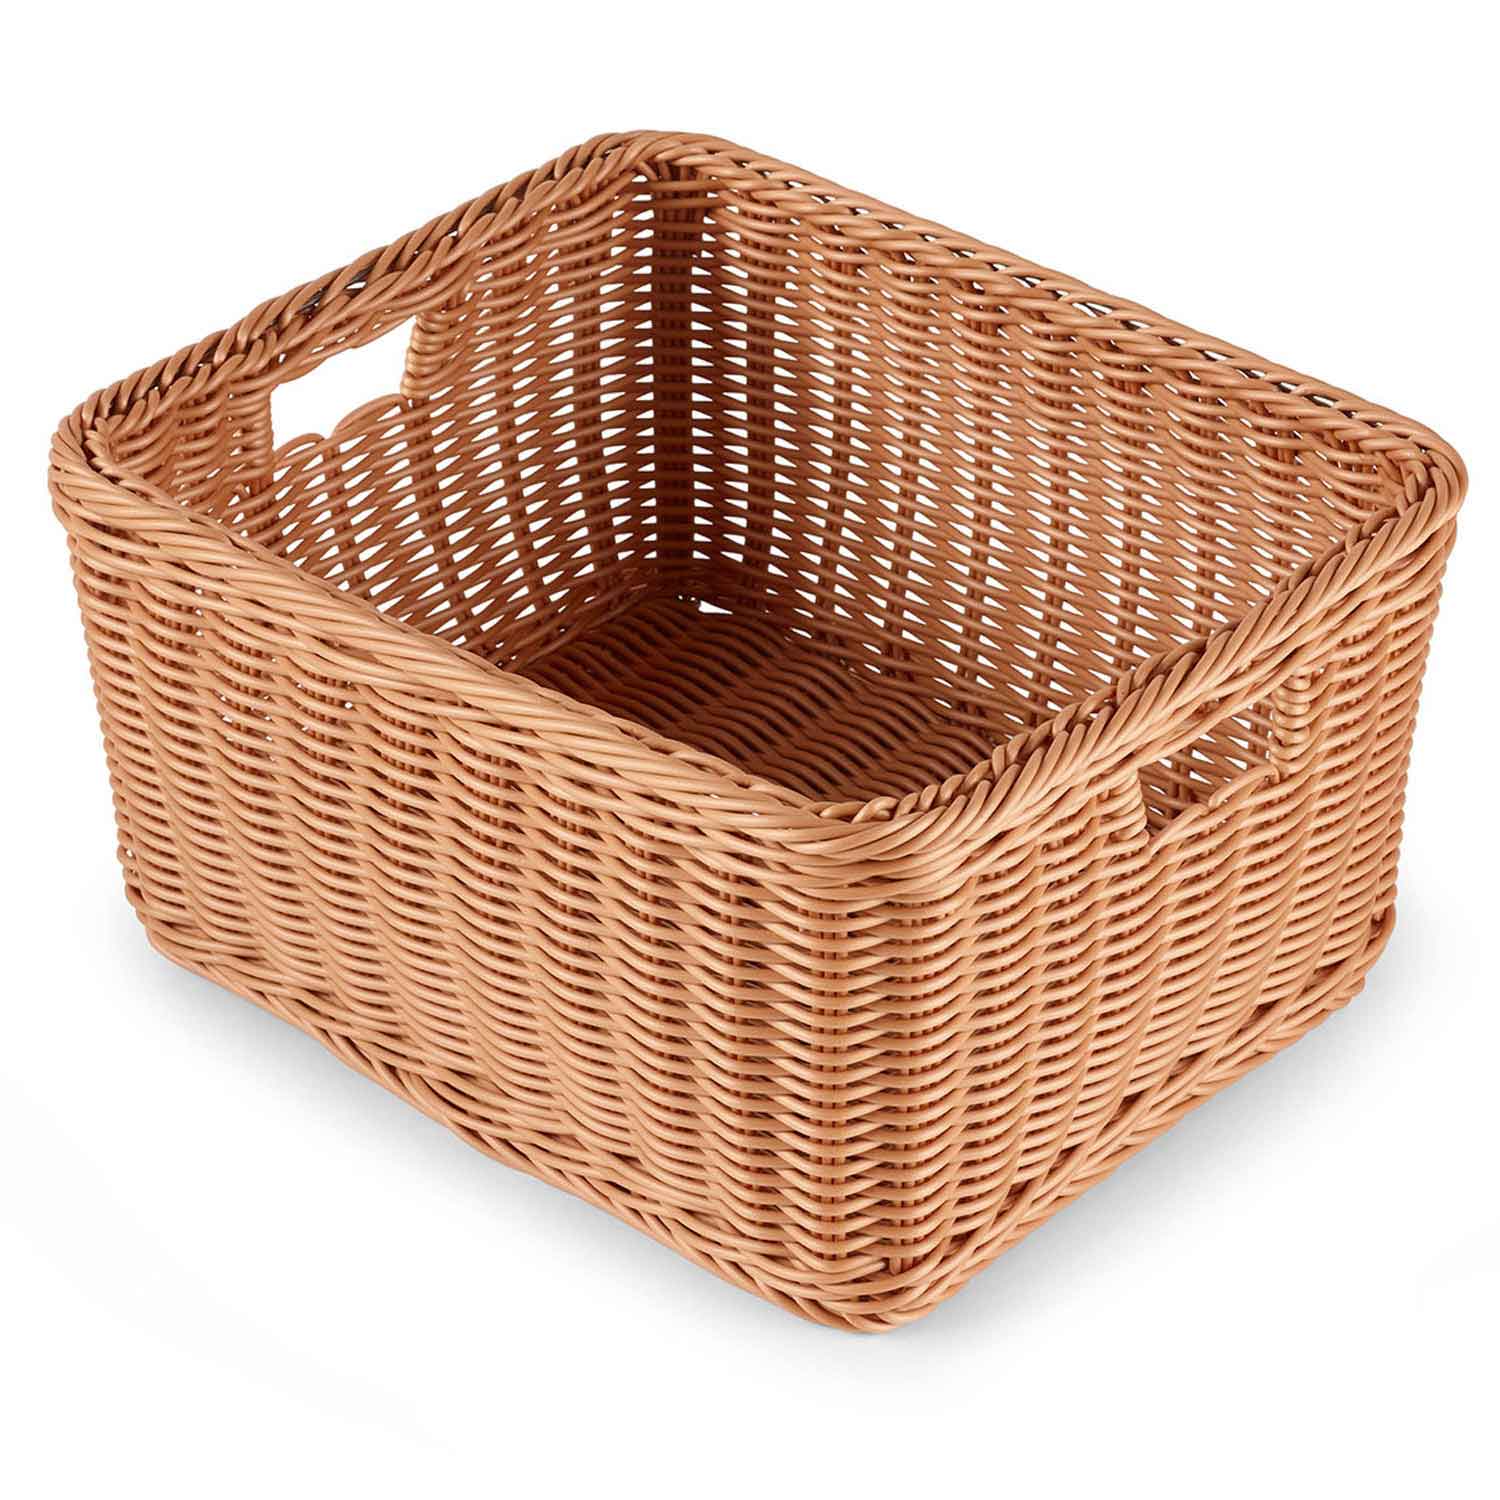 Plastic Woven Basket with Handles - Large